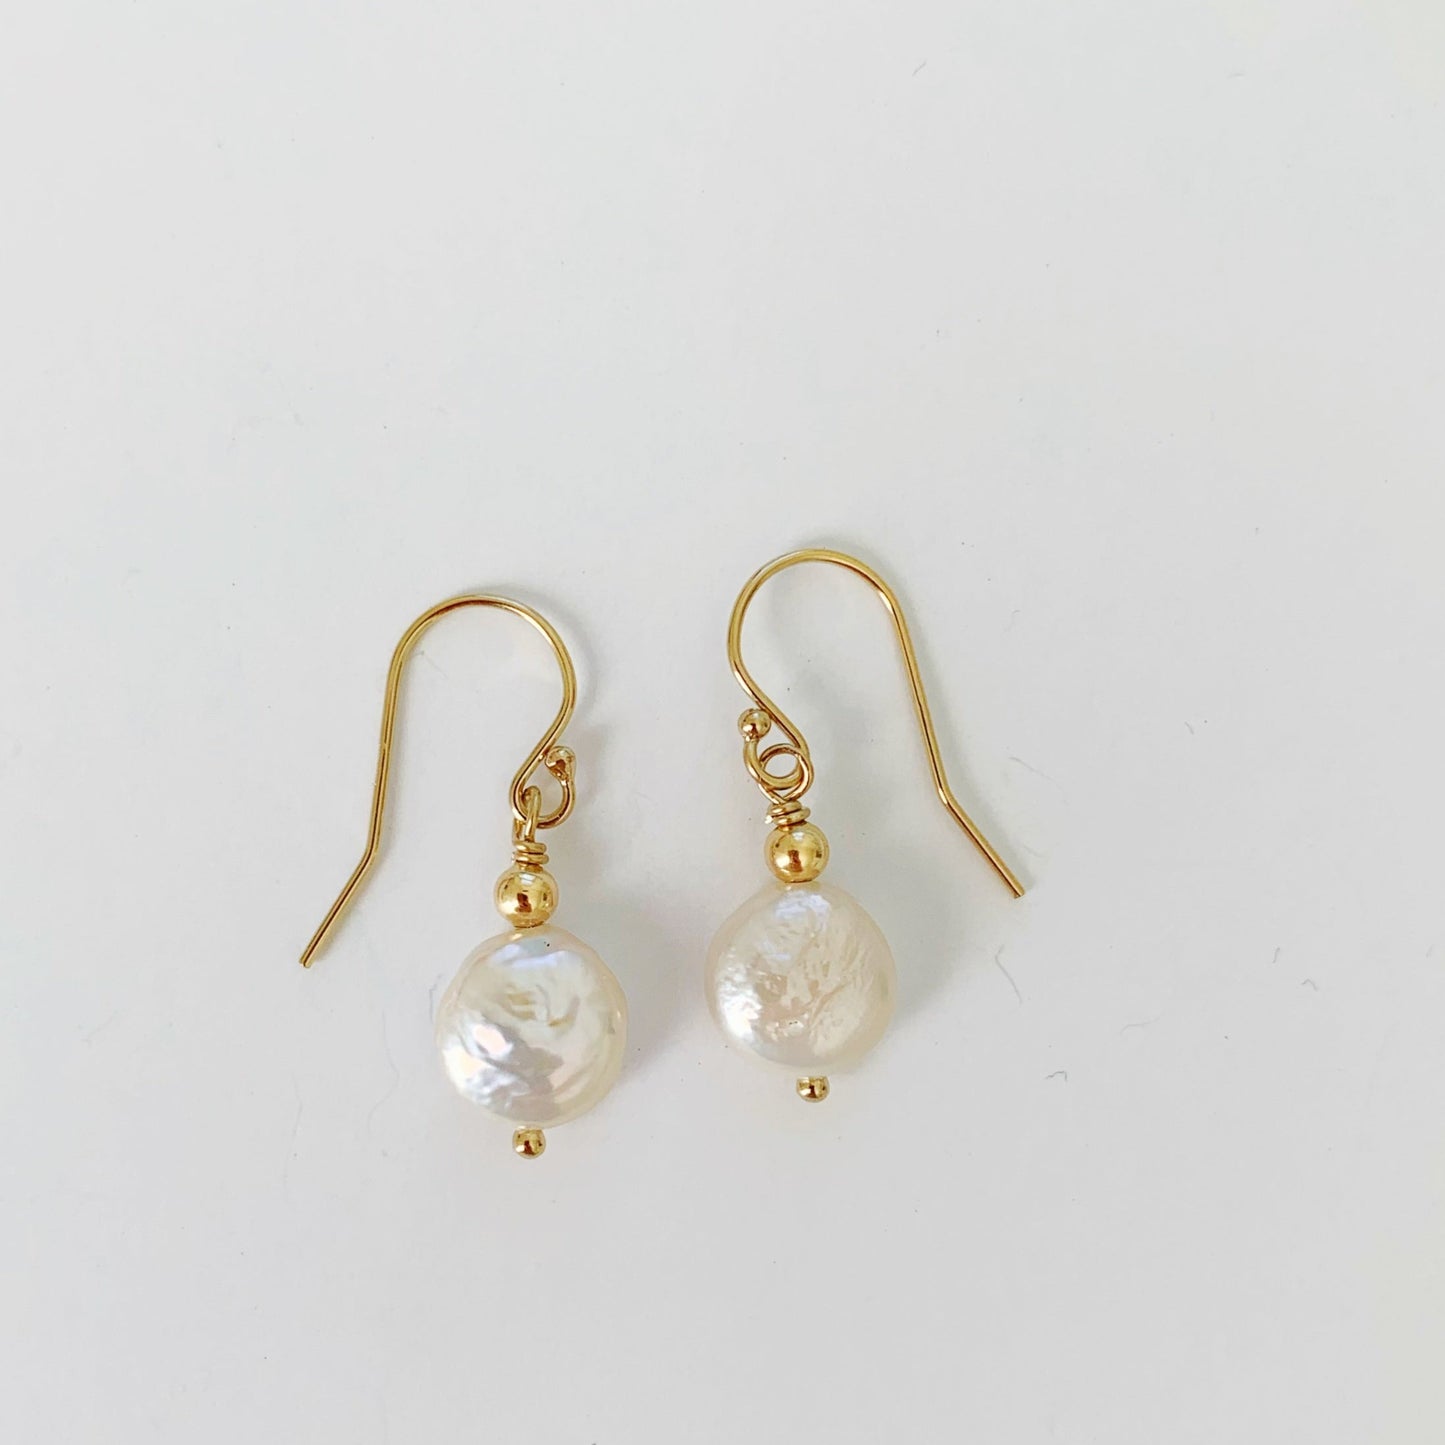 Newport Pearl Earrings by Mermaids and Madeleines are small freshwater coin pearls with 14k gold filled beads and findings. these ones are photographed on a white surface